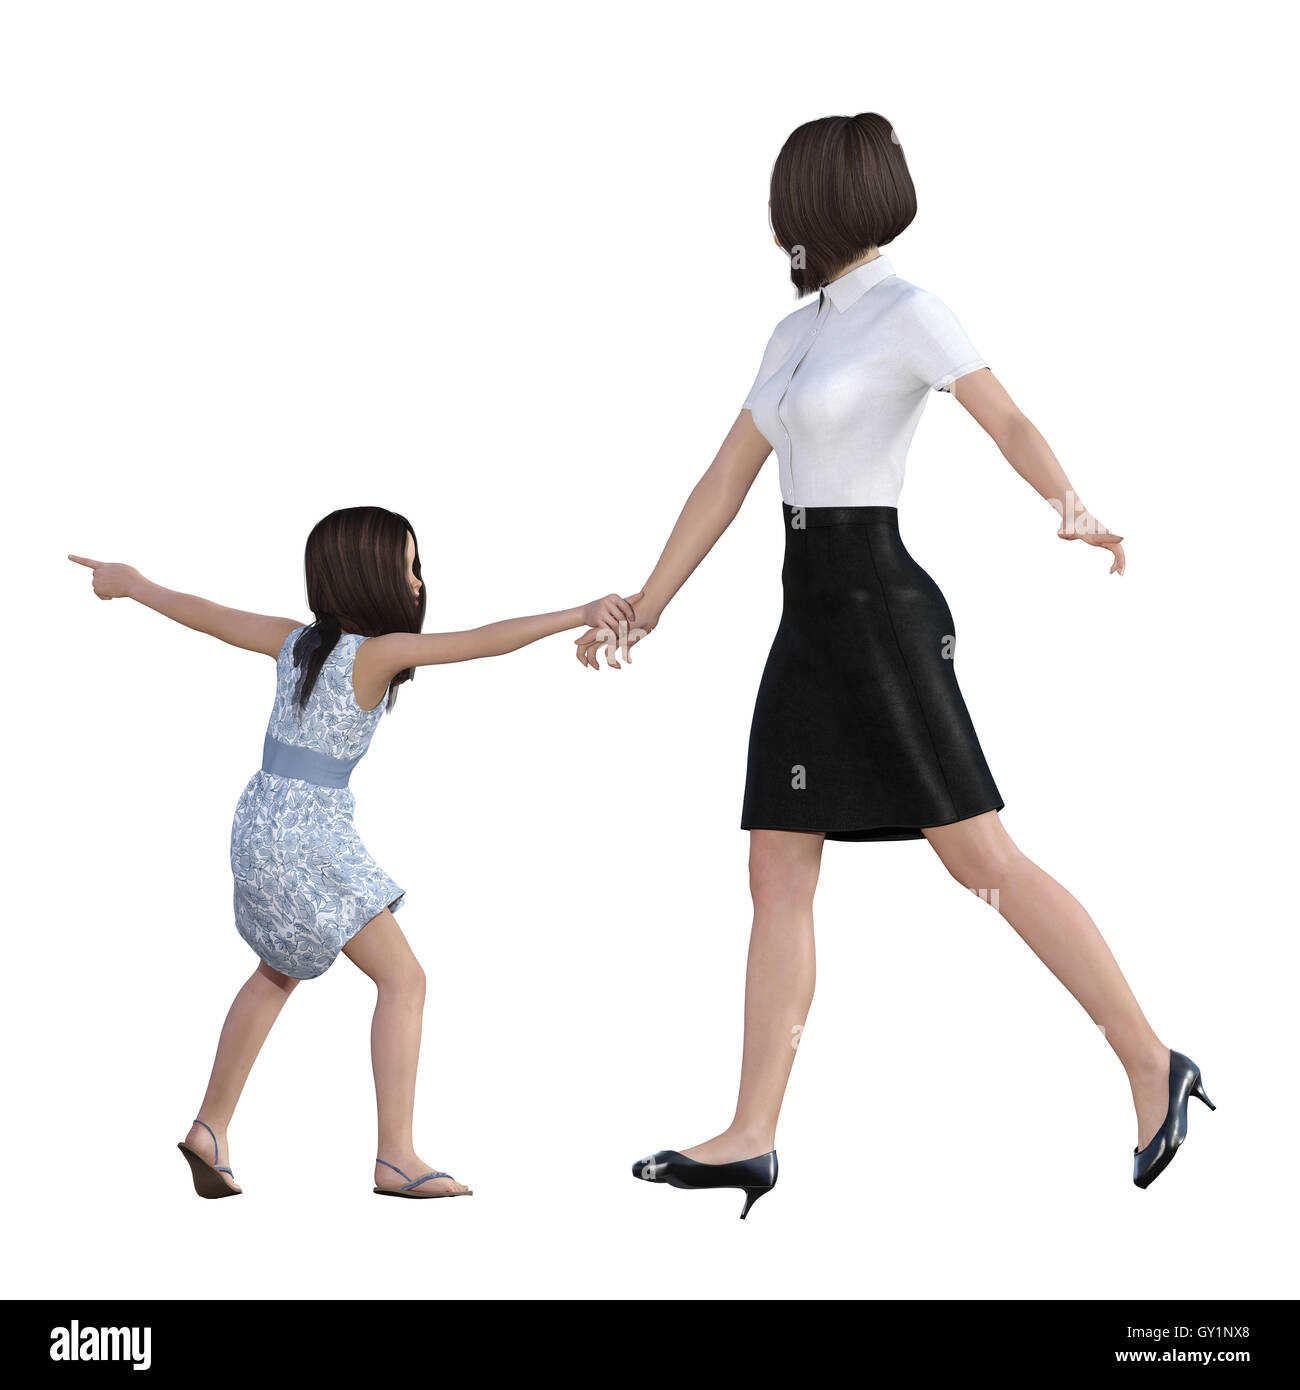 Mother Daughter Interaction of Girl Pulling Mom Hand as an Illustration Concept Stock Photo